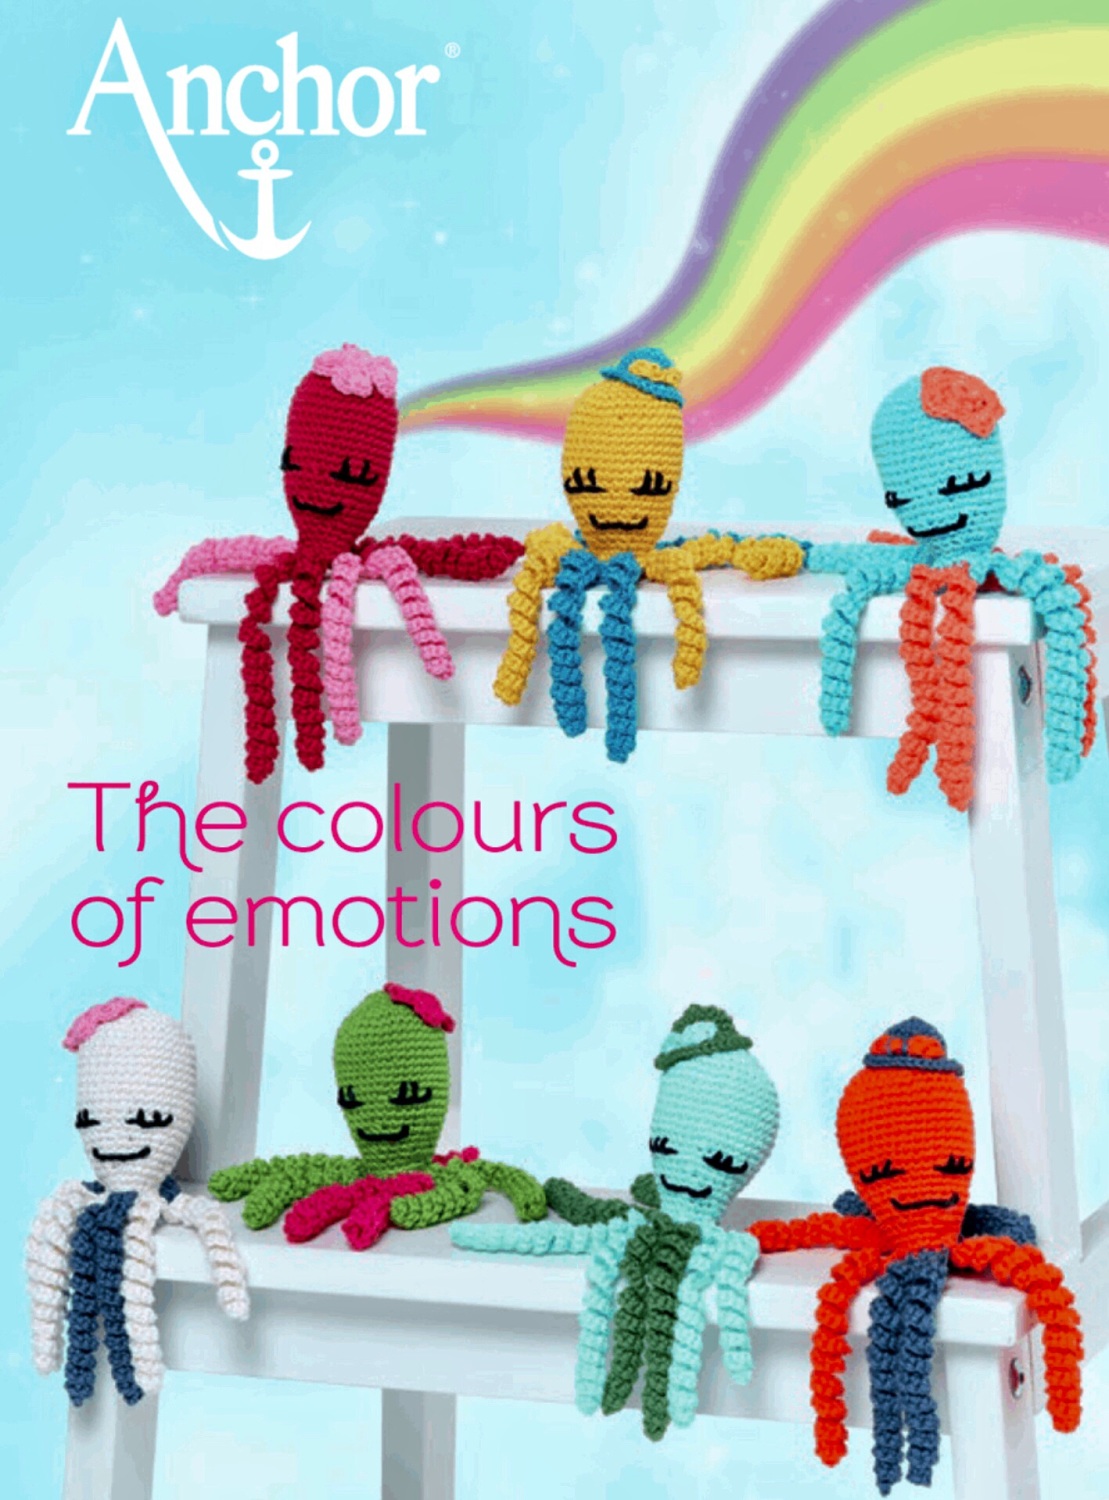 The Colours of emotions. Octopus Baby Collection. Crochet Brochure. 14 page